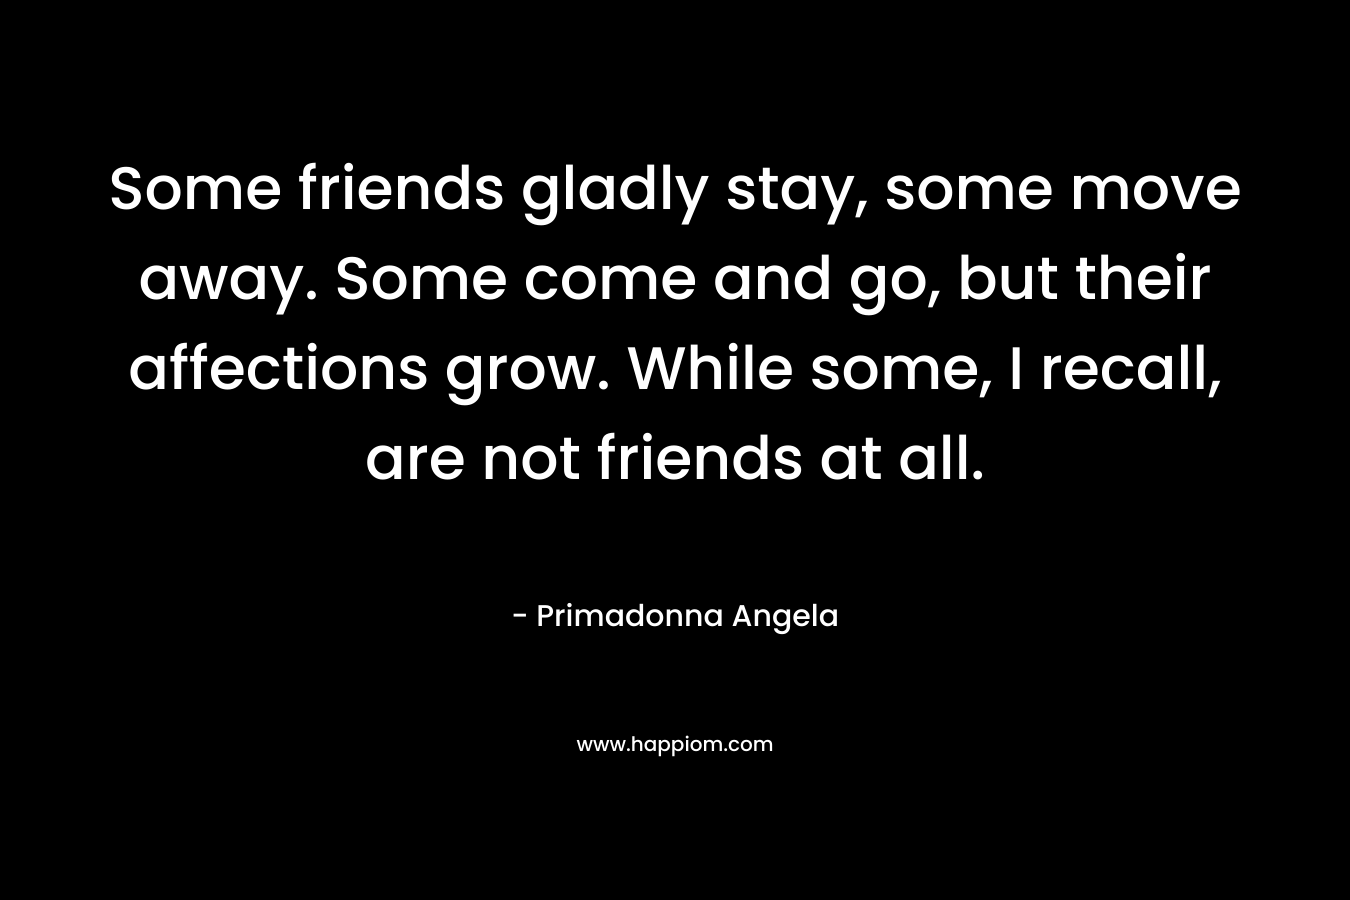 Some friends gladly stay, some move away. Some come and go, but their affections grow. While some, I recall, are not friends at all.